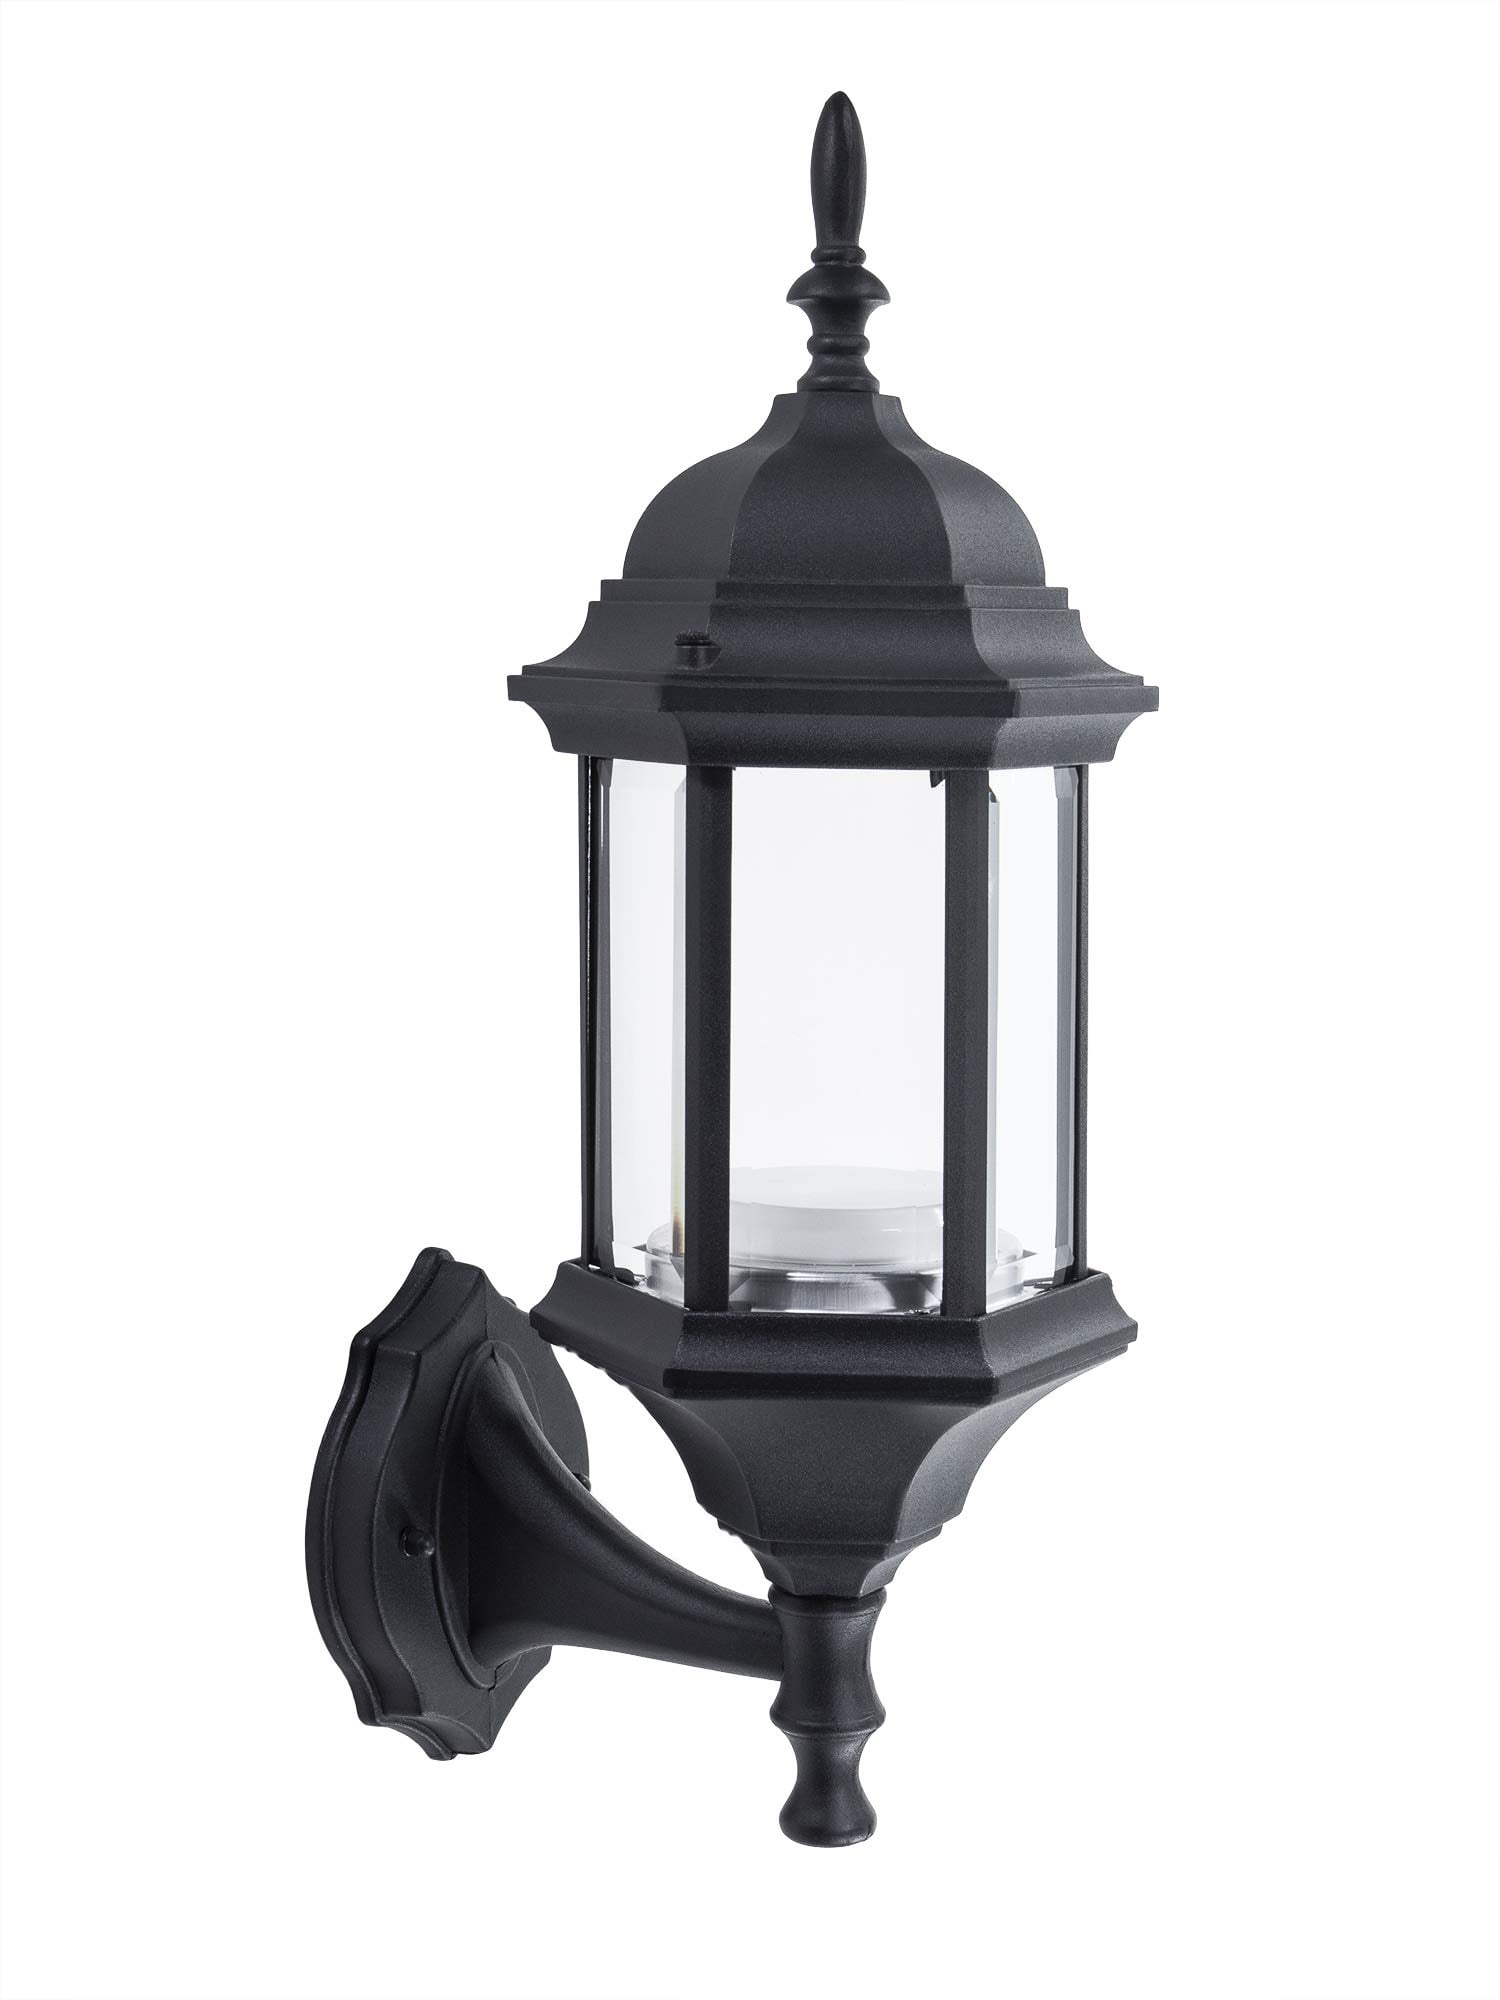 Durable Cast Aluminum with Black Finish & Beveled Glass Built in LED Gives 75W of Light from 9.5W of Power Patio Barn and More CORAMDEO Outdoor LED Wall Sconce Light for Porch Wet Location 